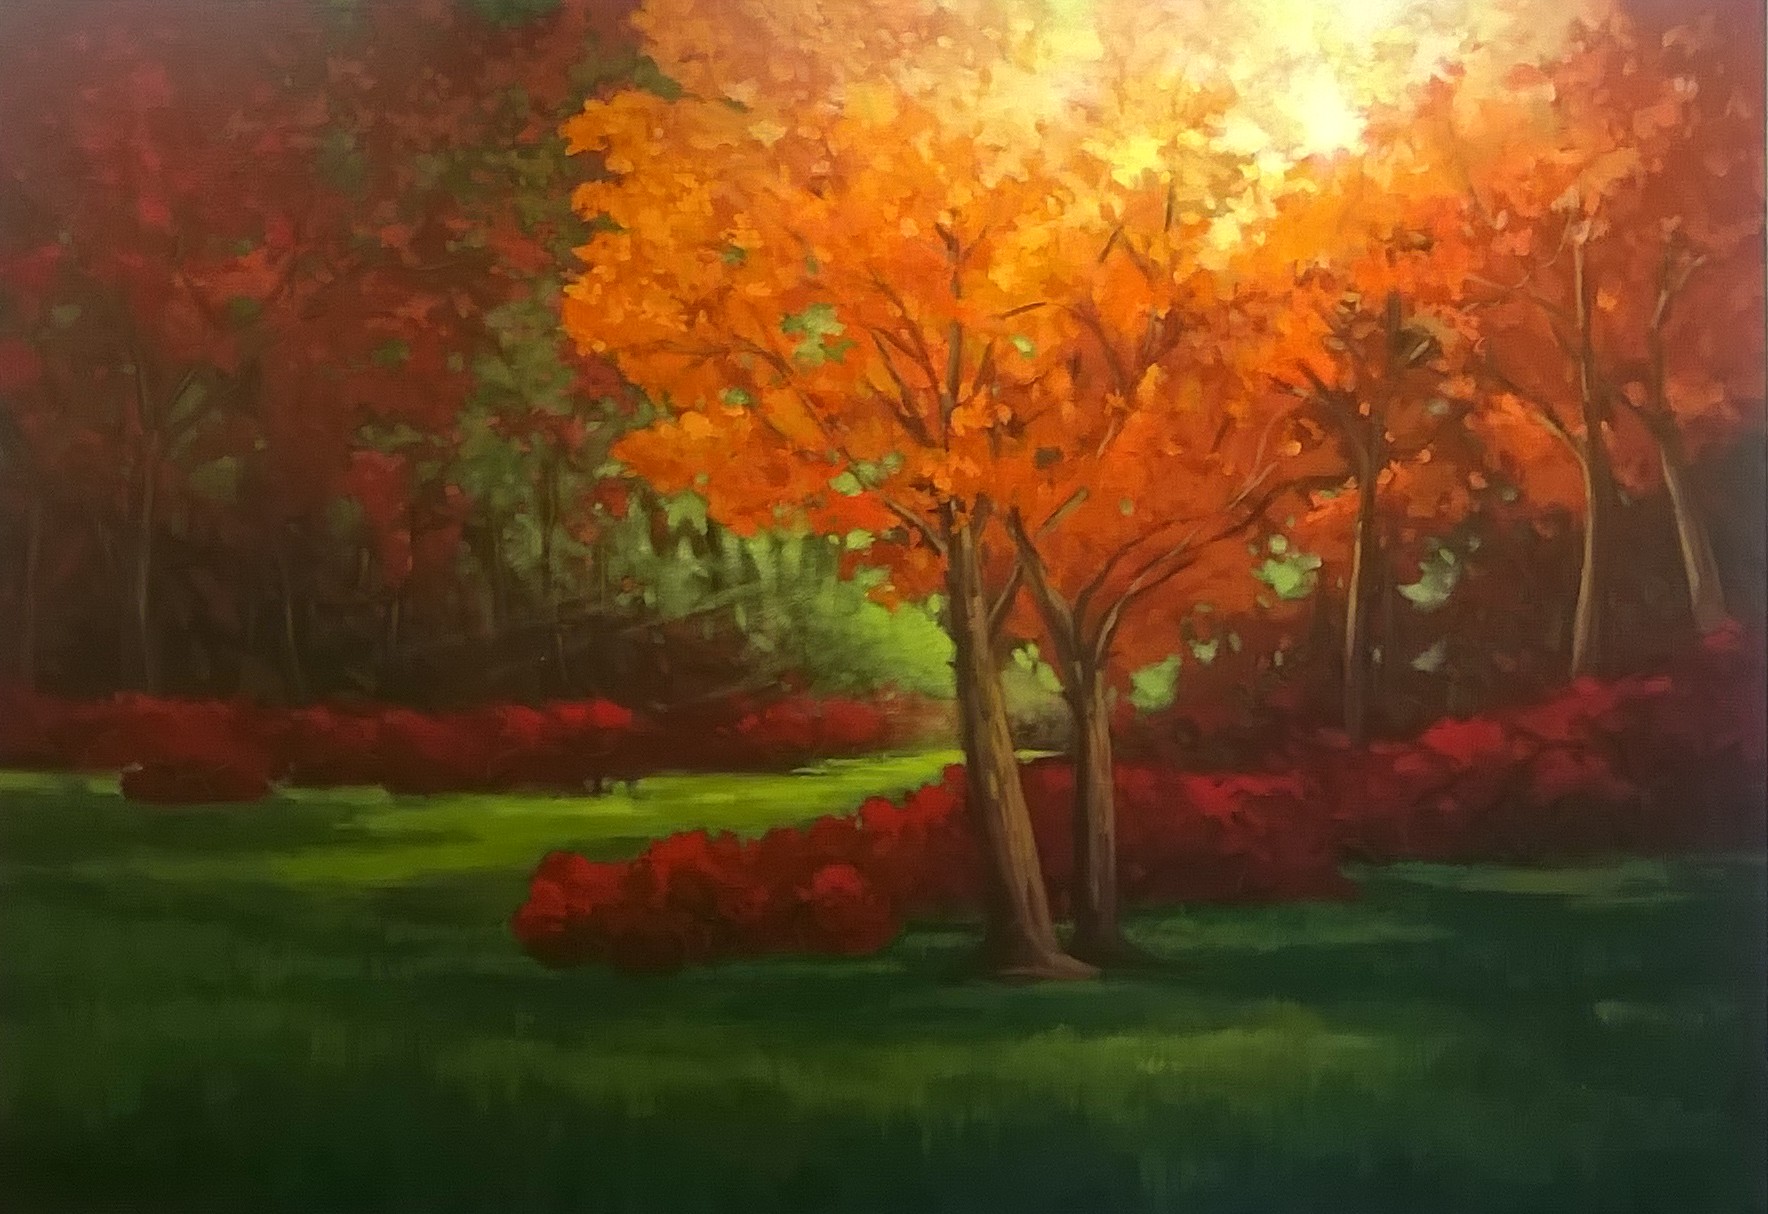 Arboretum Light | Acrylic on canvas, 60 x 48 in | Sold